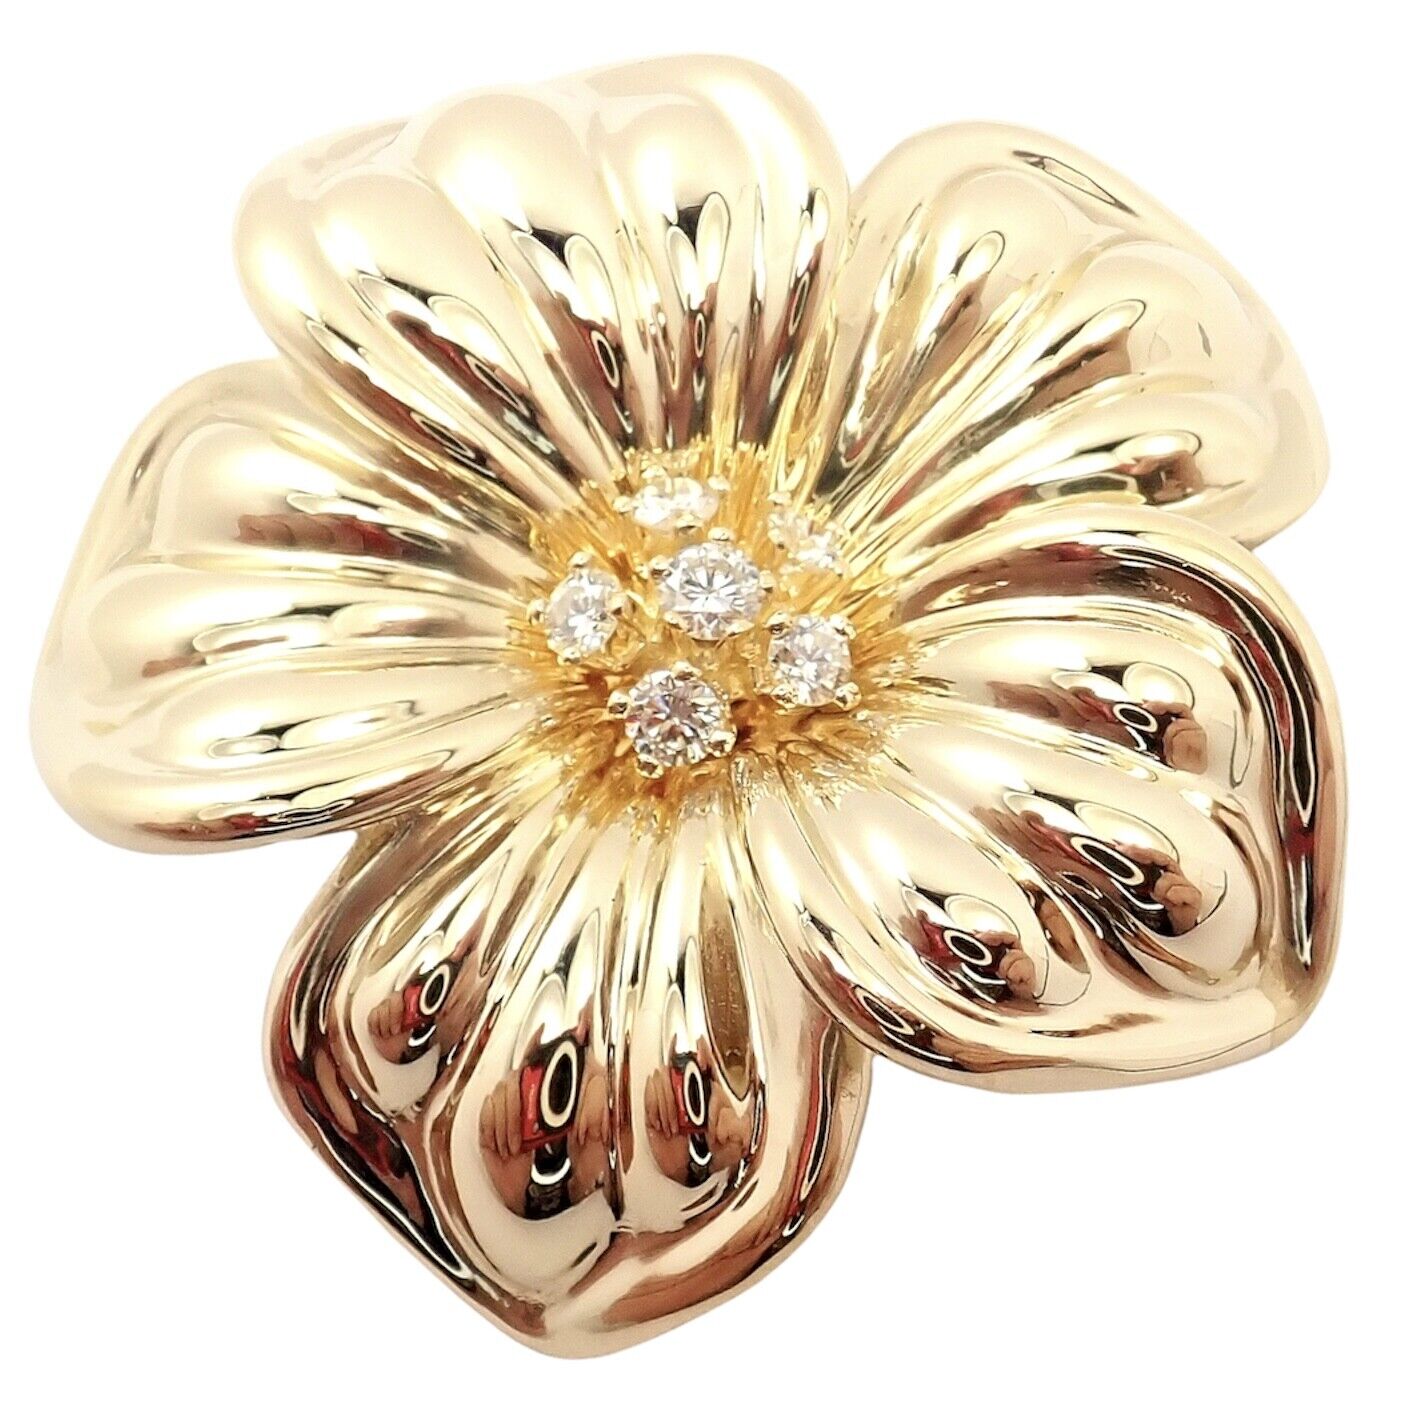 Authentic Van Cleef & Arpels Diamond 18K Yellow Gold Large Magnolia Pin Brooch